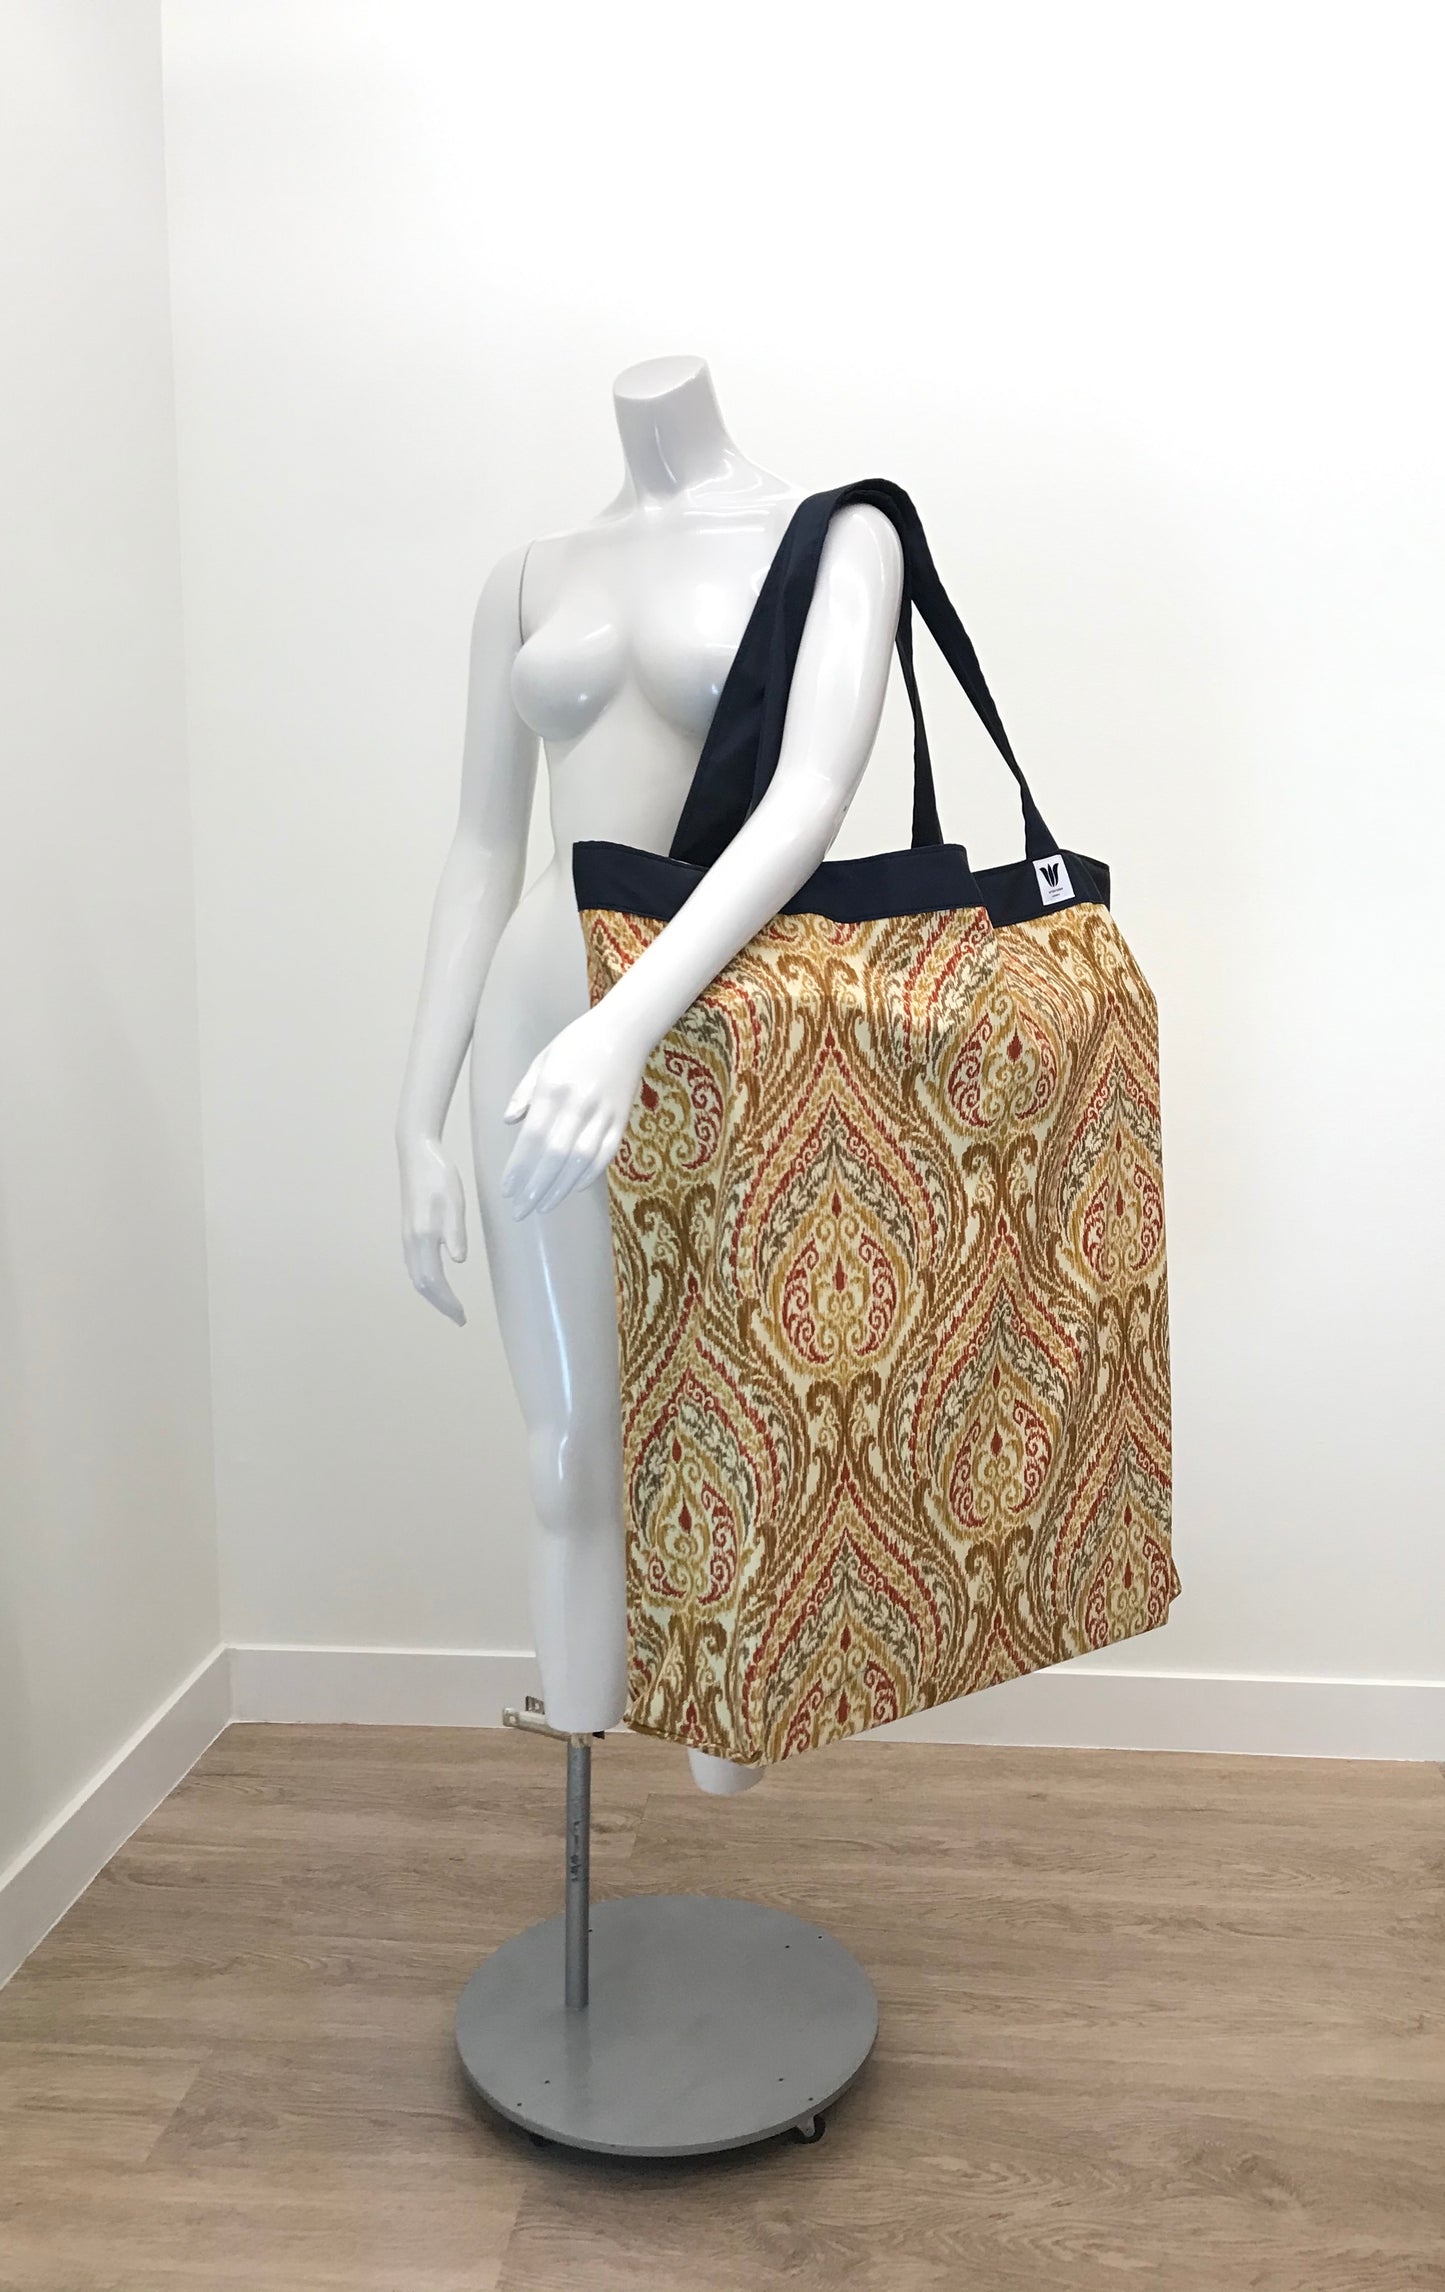 Extra Large Yoga Tote Bag in Ikat Print cotton canvas fabric to carry and or store yoga props for yoga practice. Made in Canada by My Yoga Room Elements